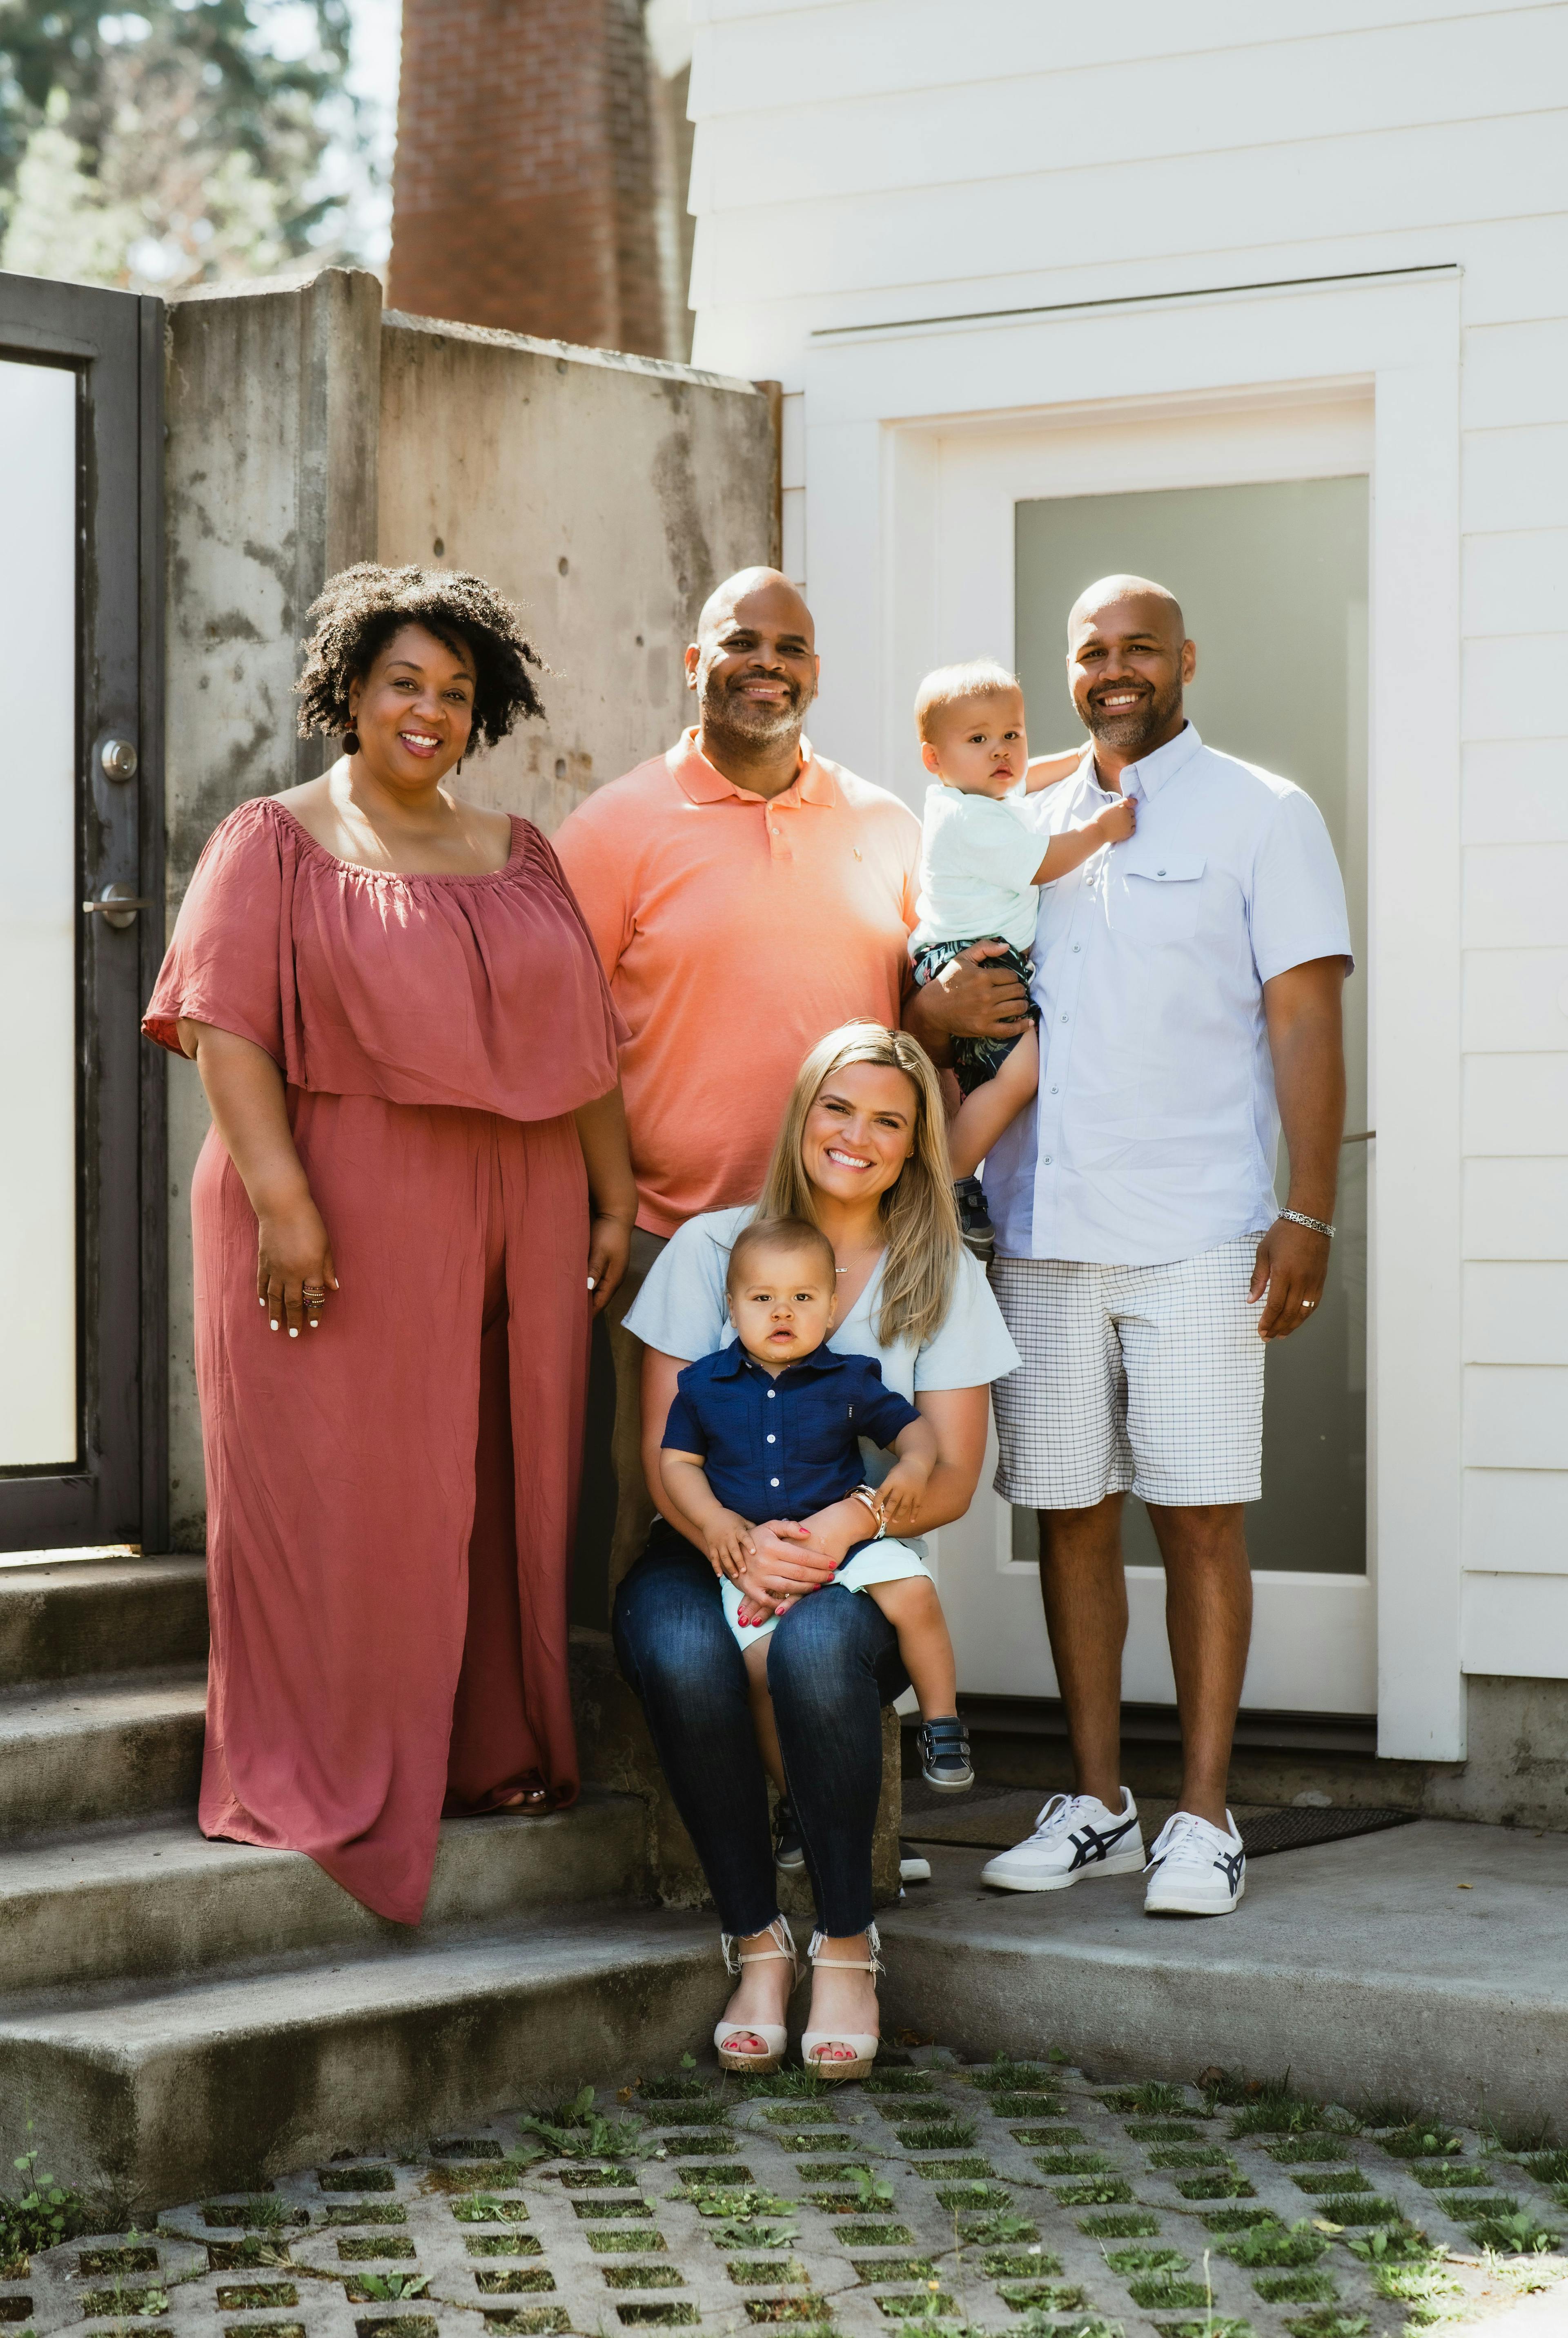 Tamika Felder (left) and her husband, Rocky Campbell (center), pose for a photo with Ginny Marable (sitting) and her partner (right) with the children of Marable and her partner, Sean. Recently, Marable offered fellow cervical cancer survivor Felder her unused embryos to start a family. Now, Felder and her husband are set to welcome a baby boy in November. 



Photo credit: Elyse Cosgrove from Torch Pictures